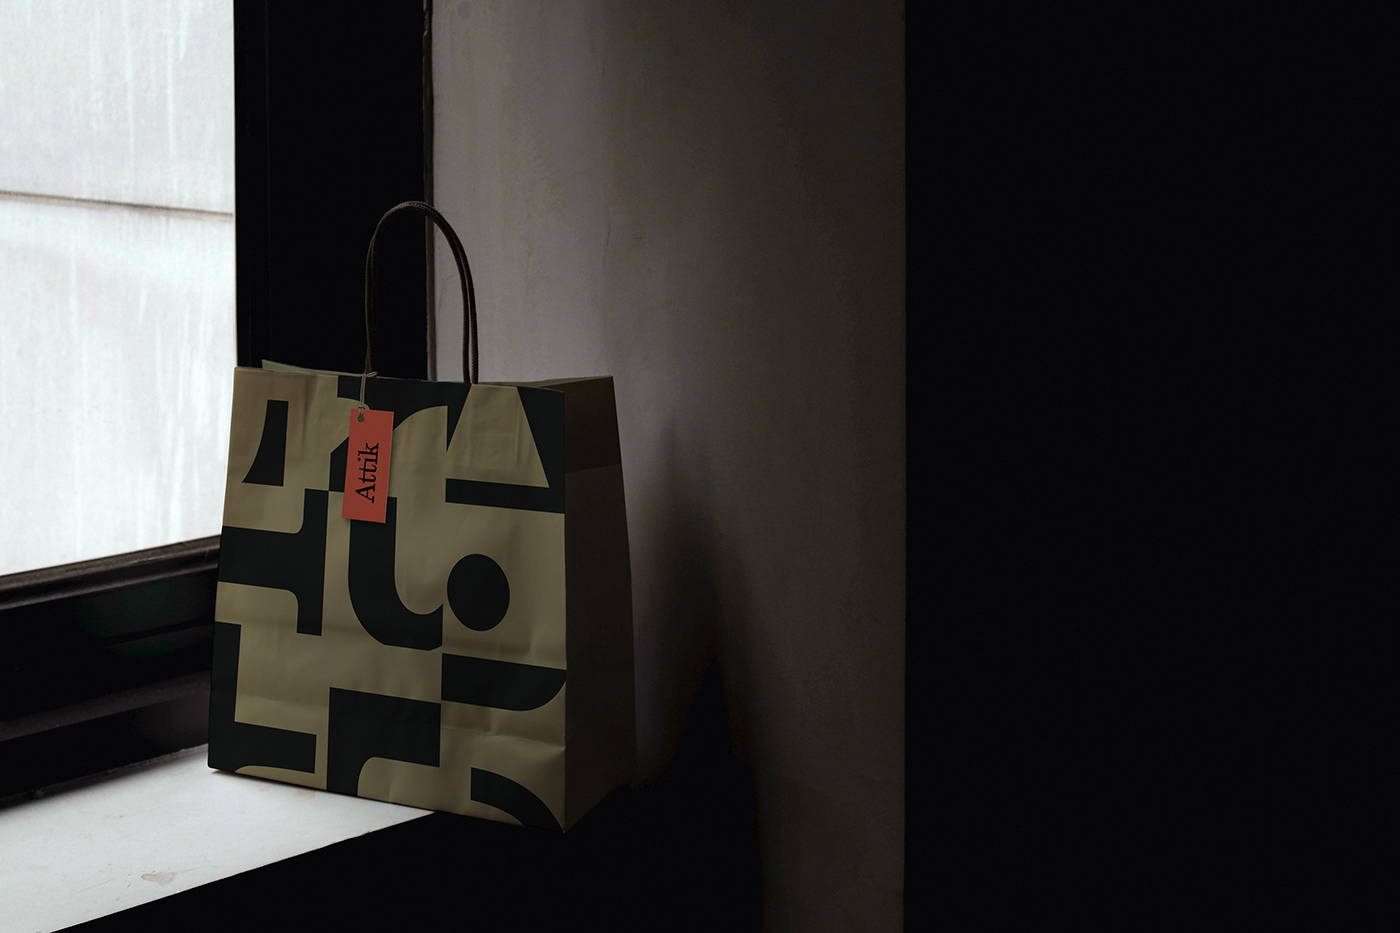 The paper bag with pattern made from logo particles 